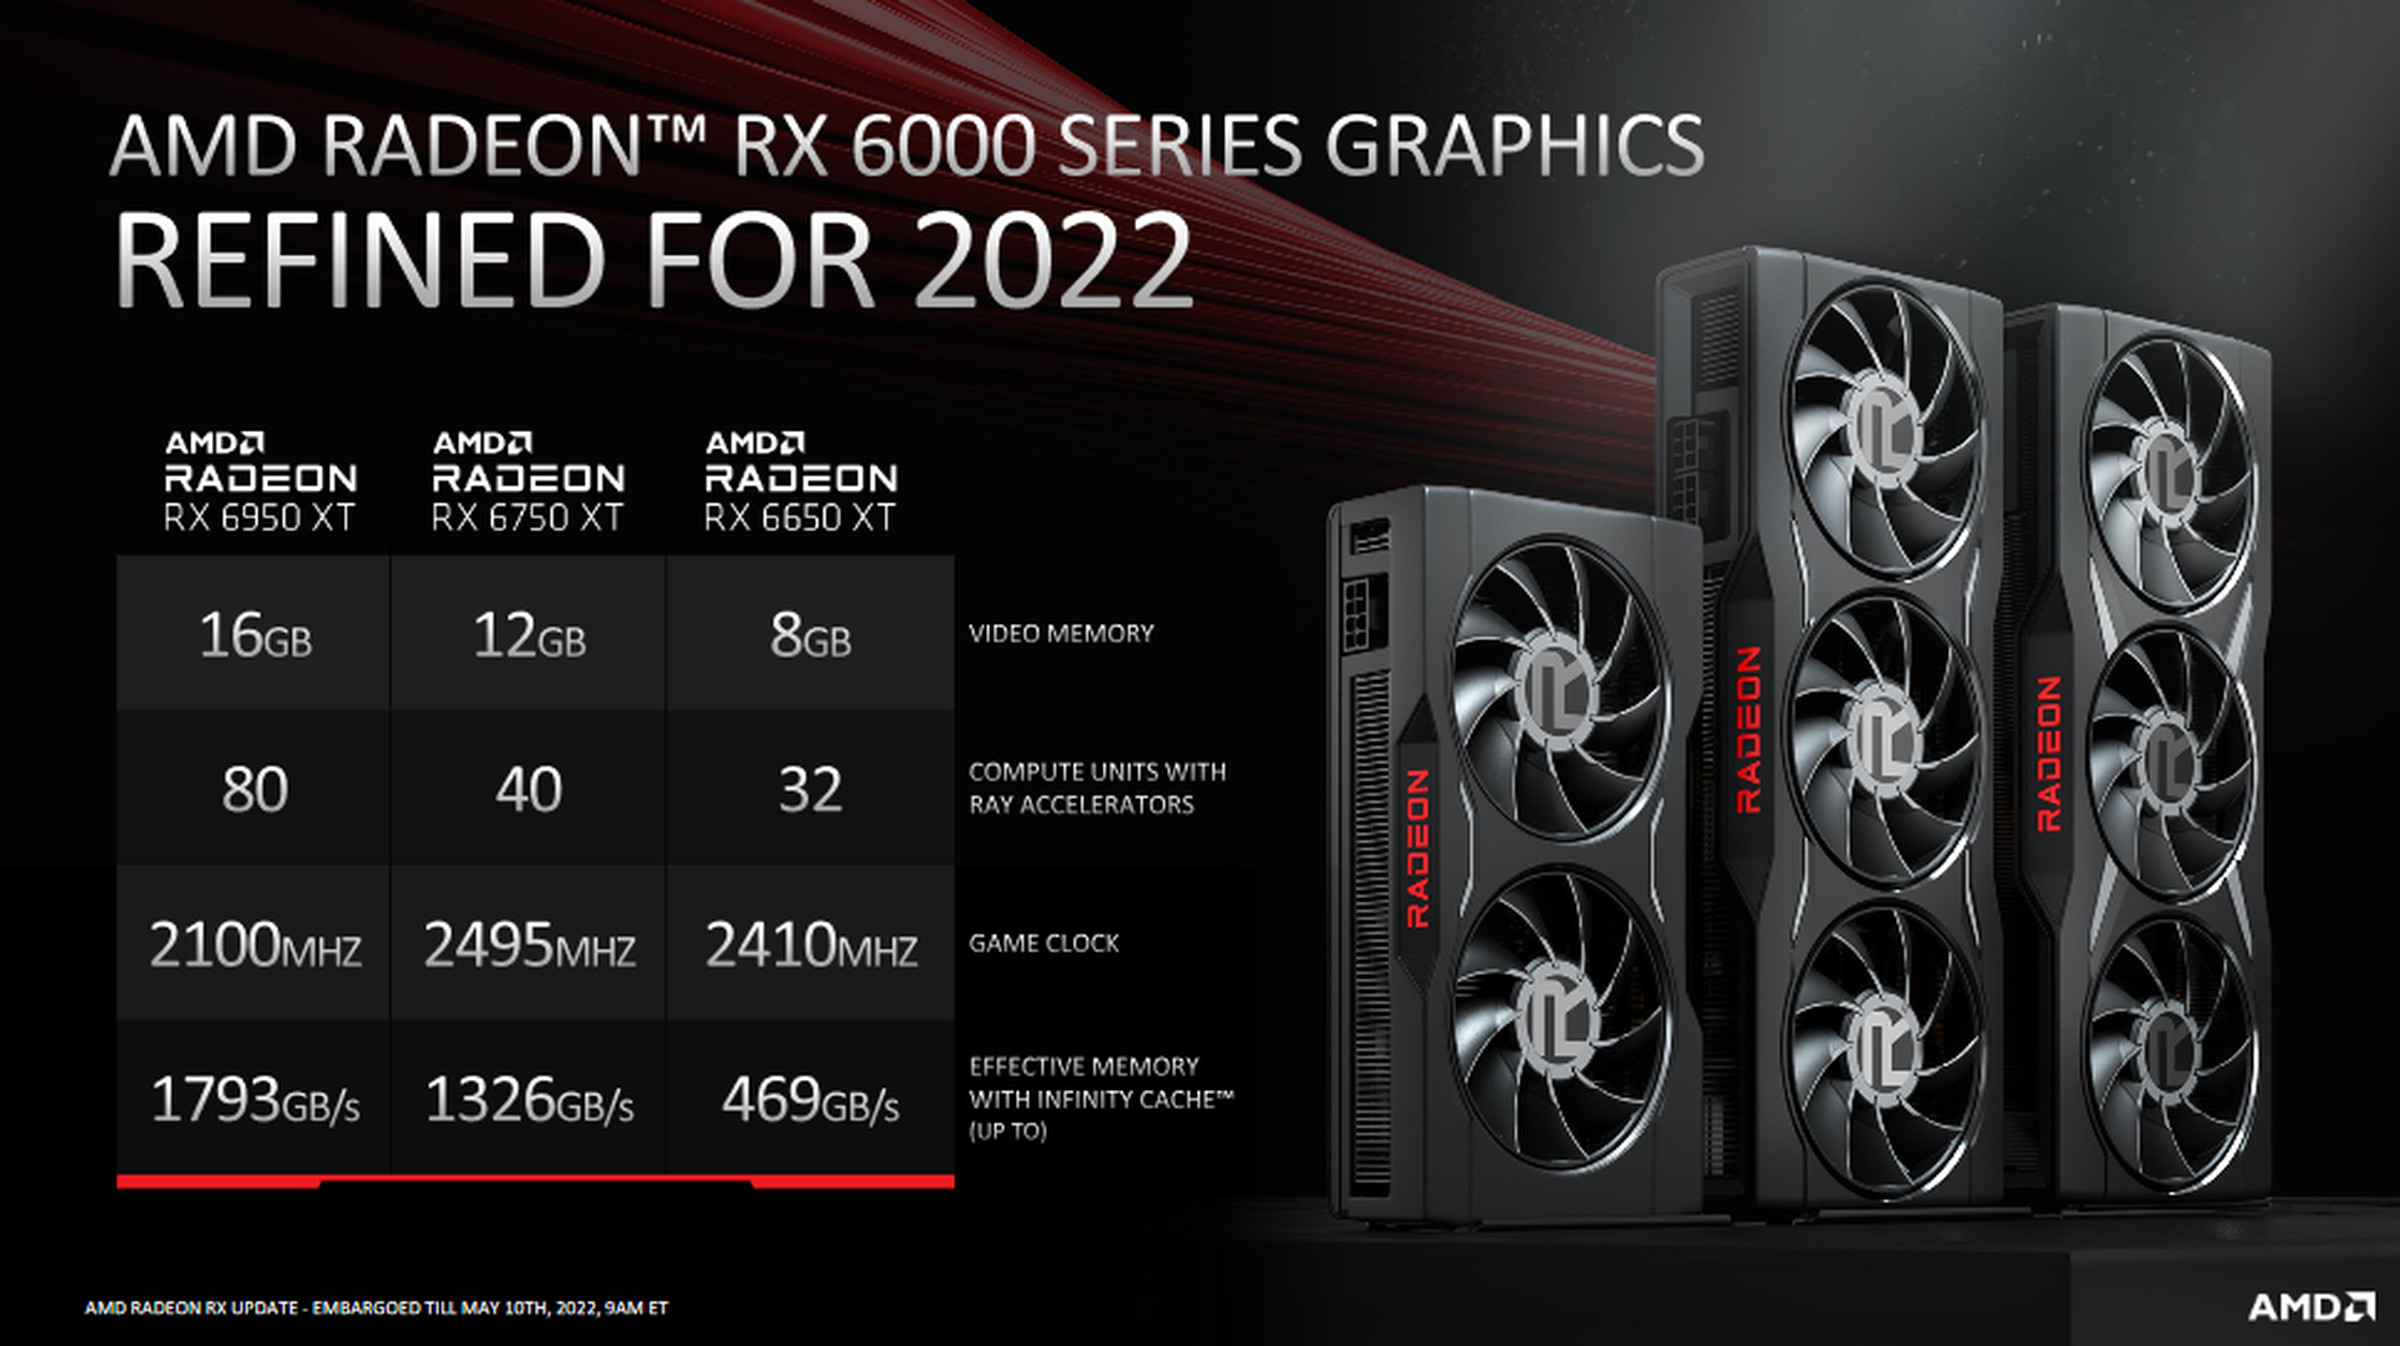 AMD says that the 6900 XT and 6700 XT will be sticking around, but the 6600 XT is being replaced by the 6950 XT.